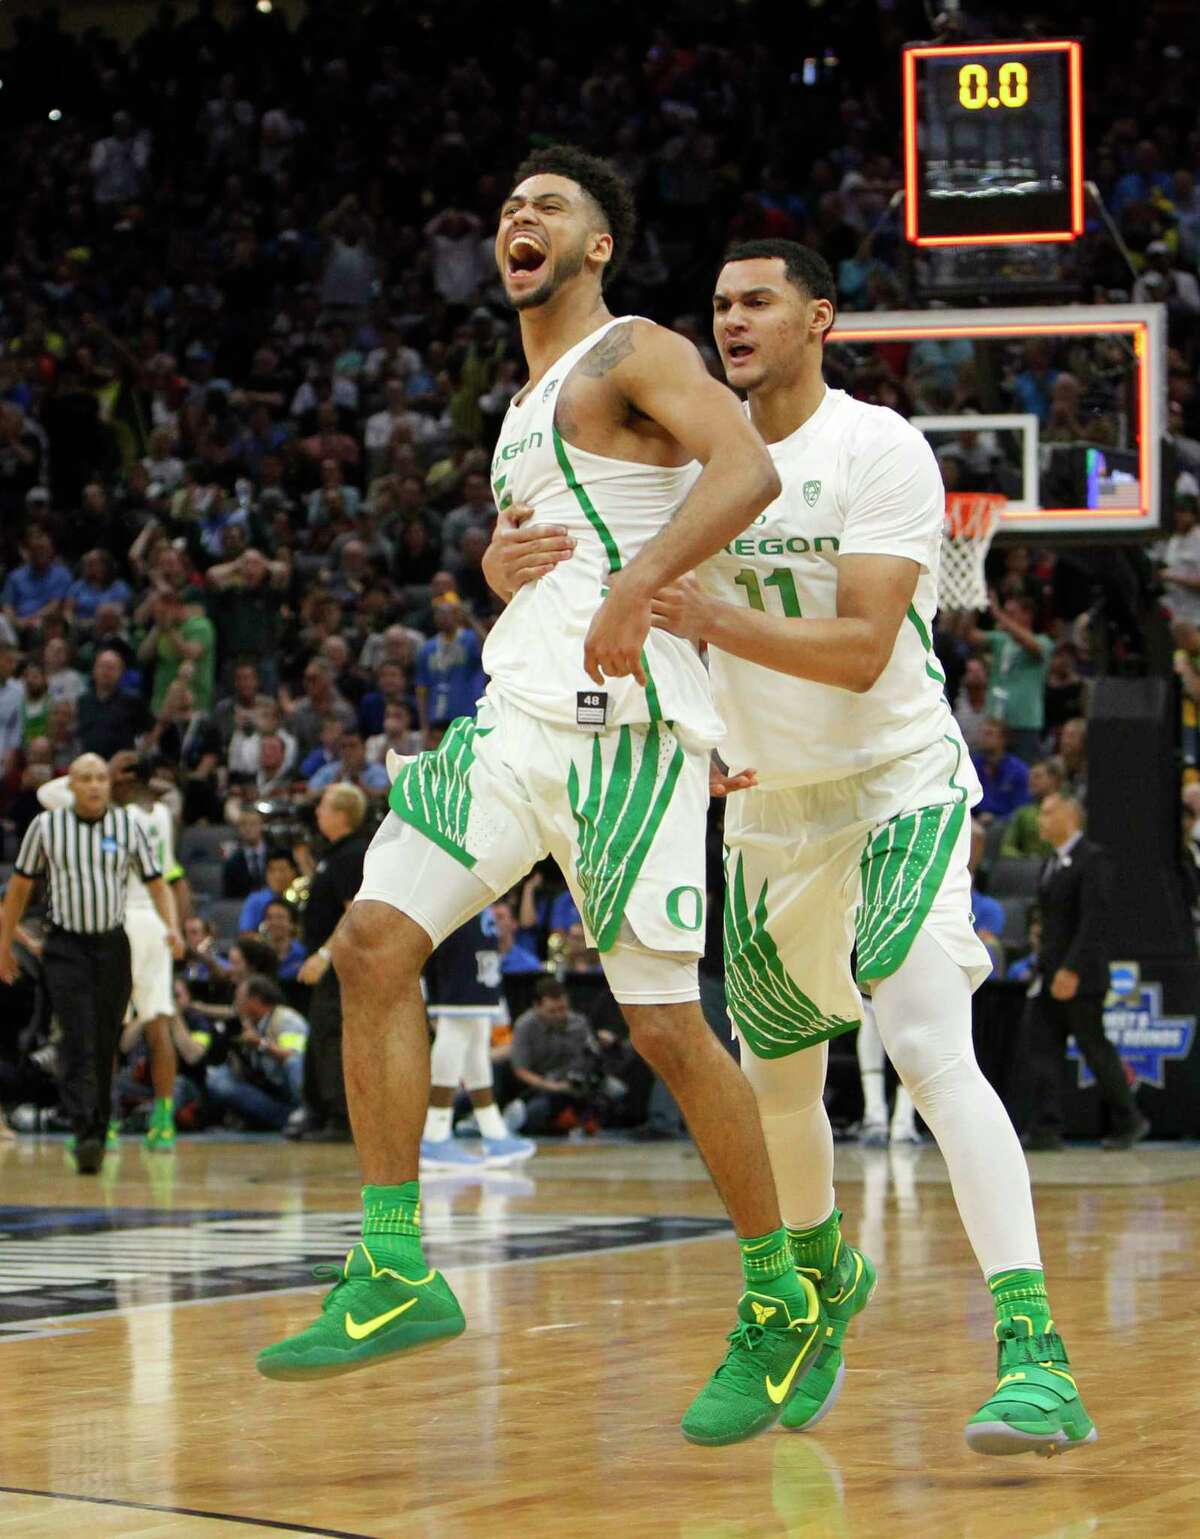 Oregon guard Tyler Dorsey (5) celebrates with teammate Keith Smith (11) after their win over Rhode Island during a second-round game in the NCAA college basketball tournament in Sacramento, Calif., Sunday, March 19, 2017. Oregon won 75-72. (AP Photo/Steve Yeater)